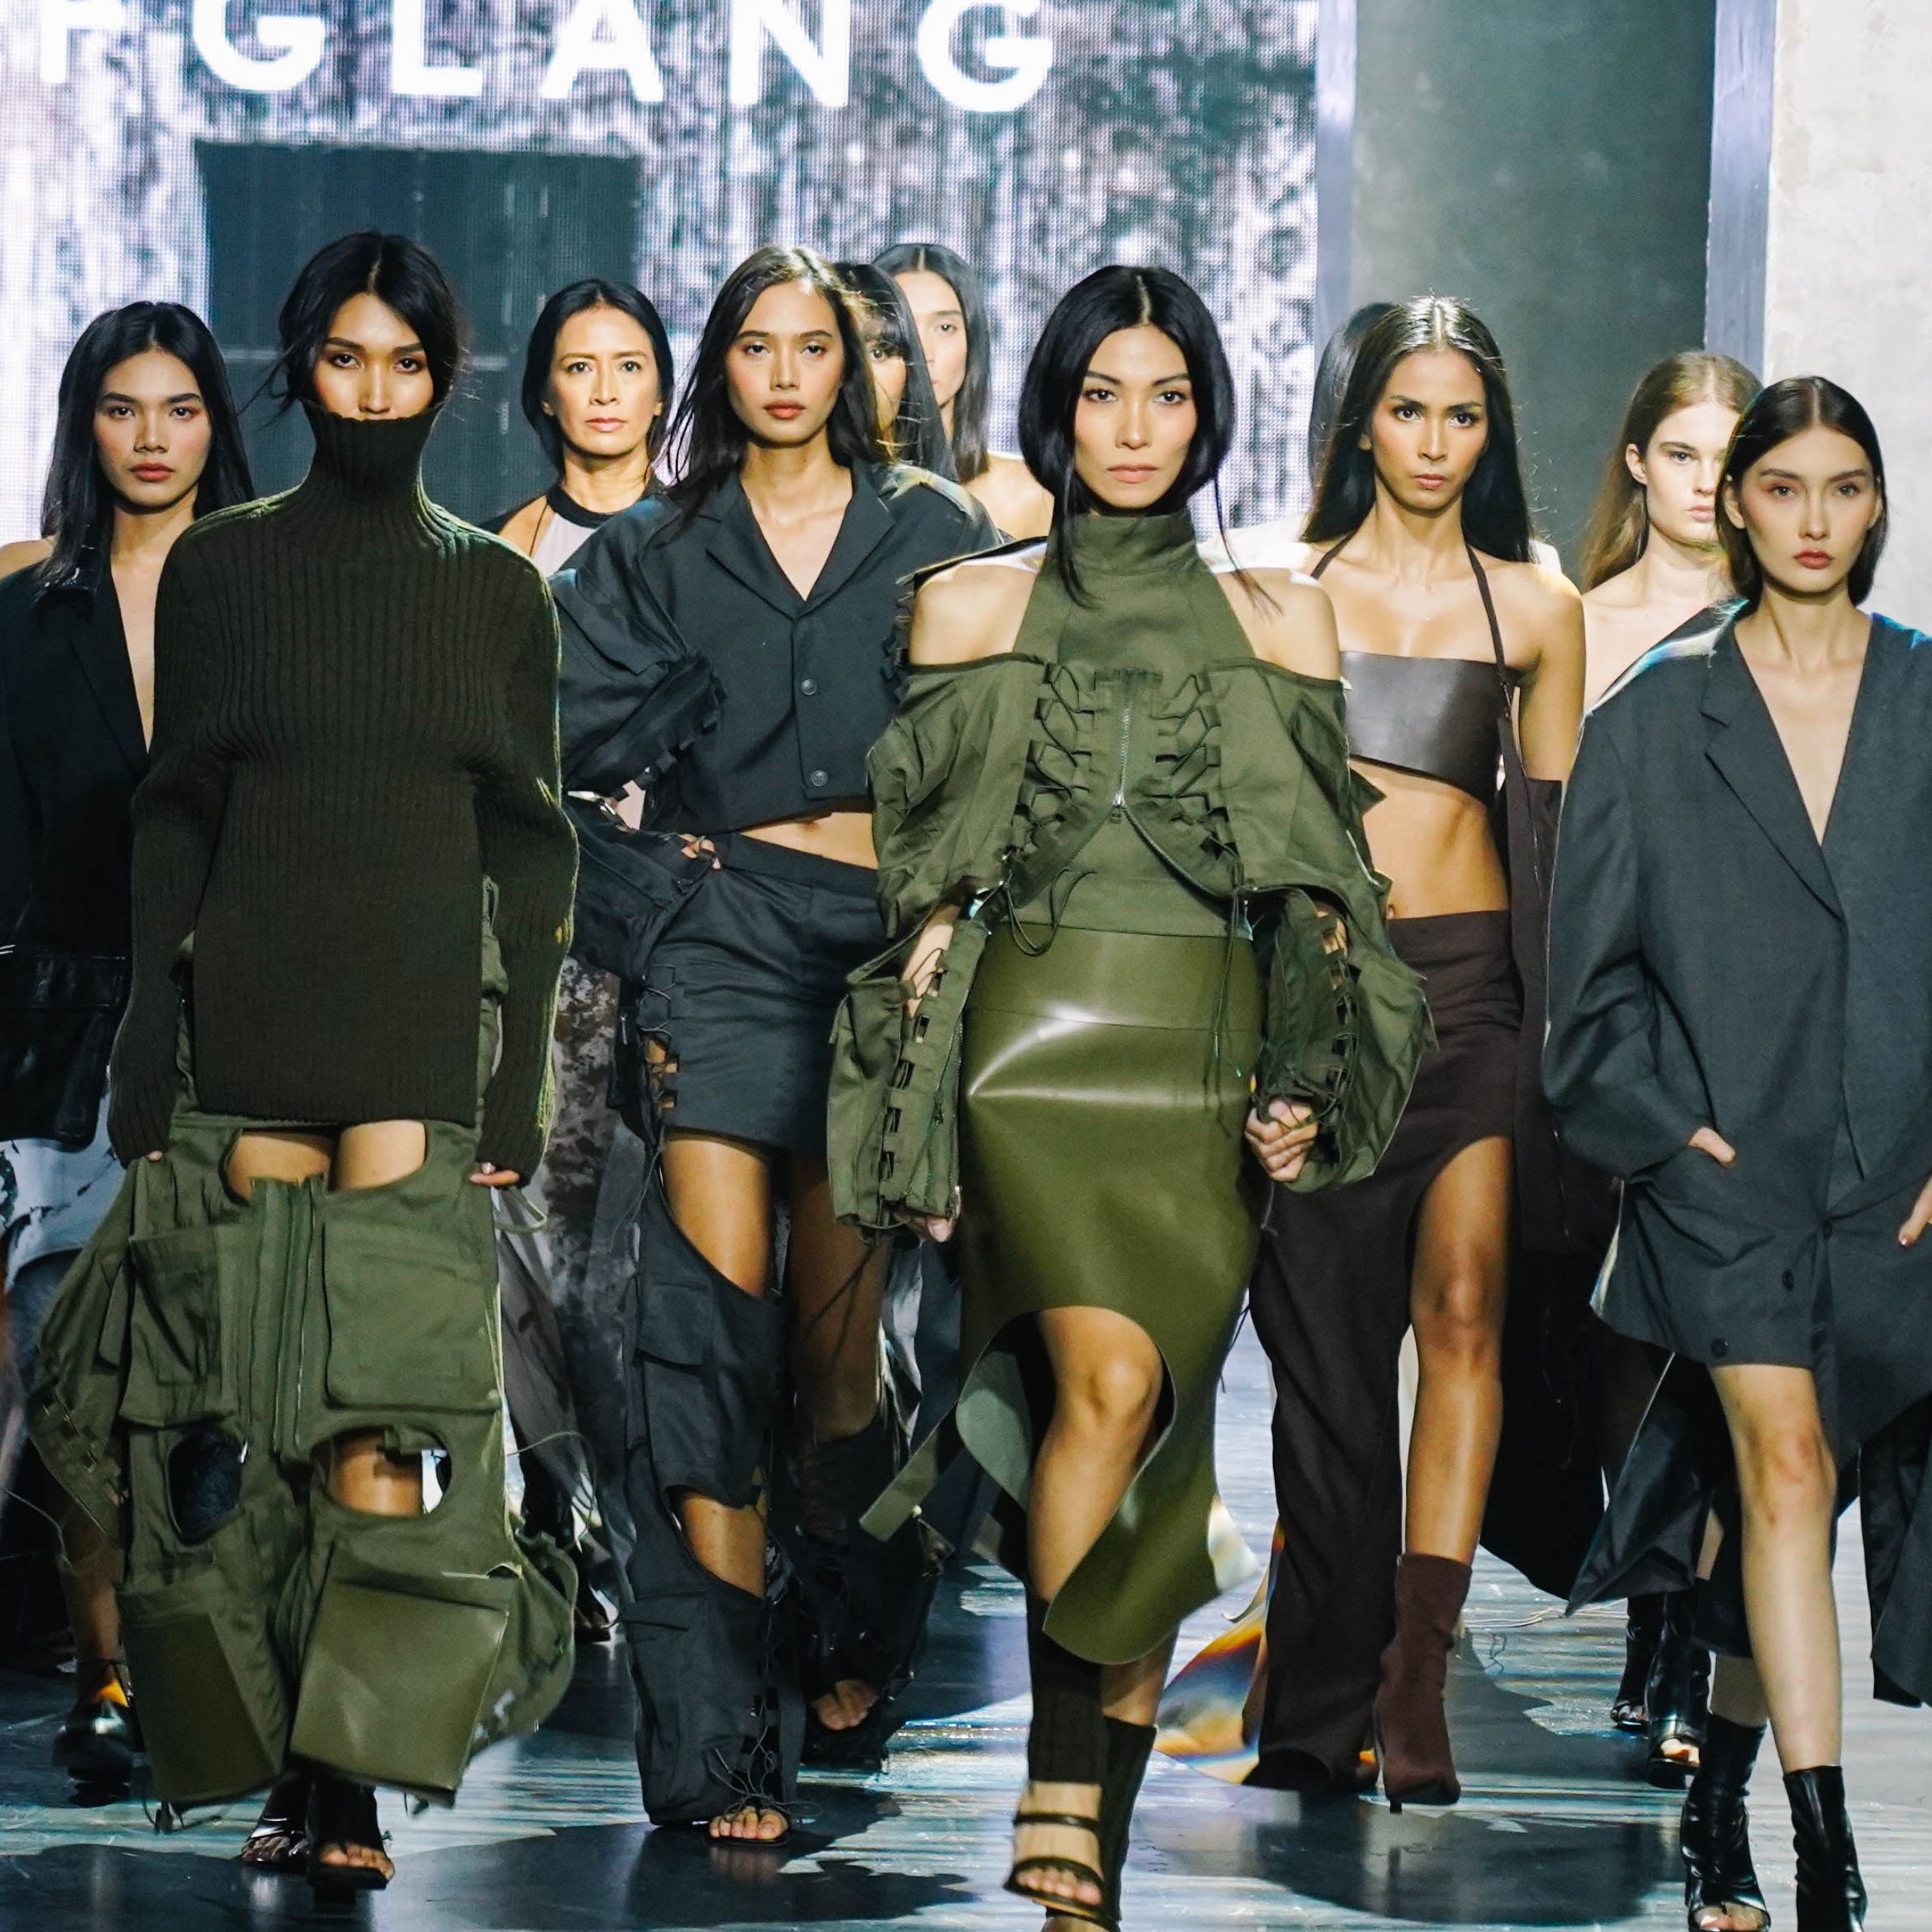 These Collections Give an Ode to Filipino Culture and Fashion-Forward Thinking